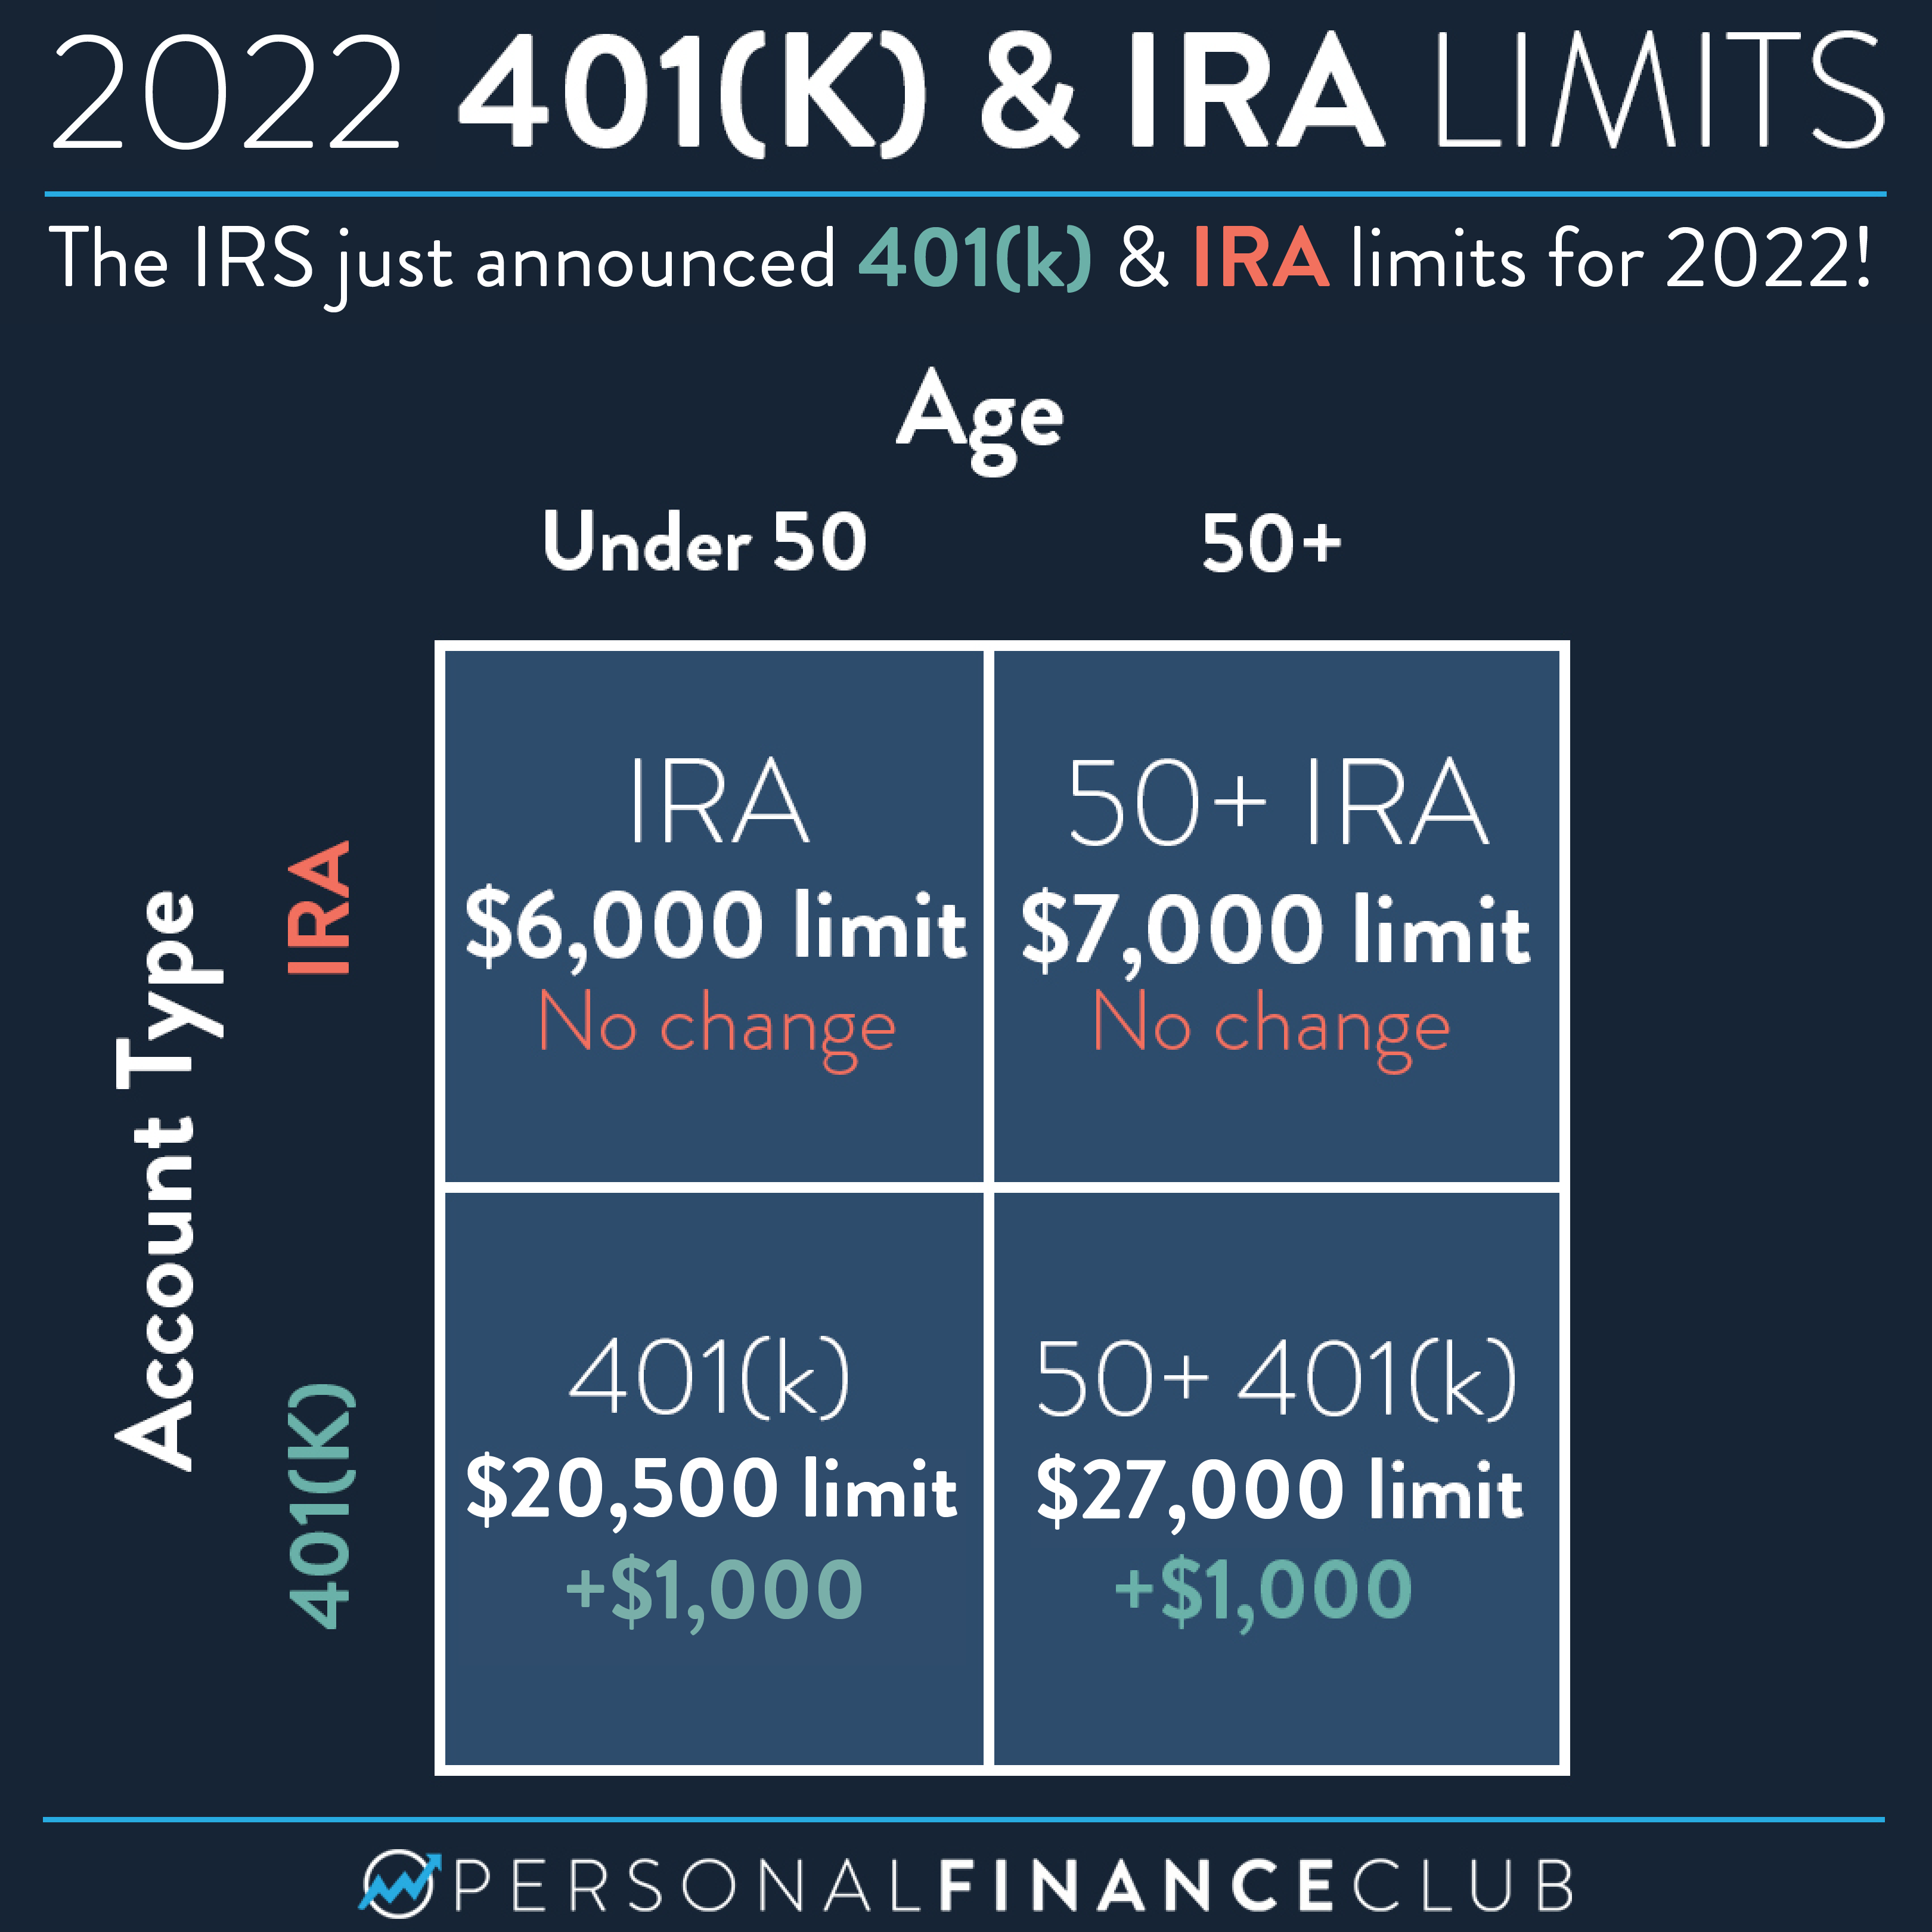 The IRS just announced the 2022 401(k) and IRA contribution limits